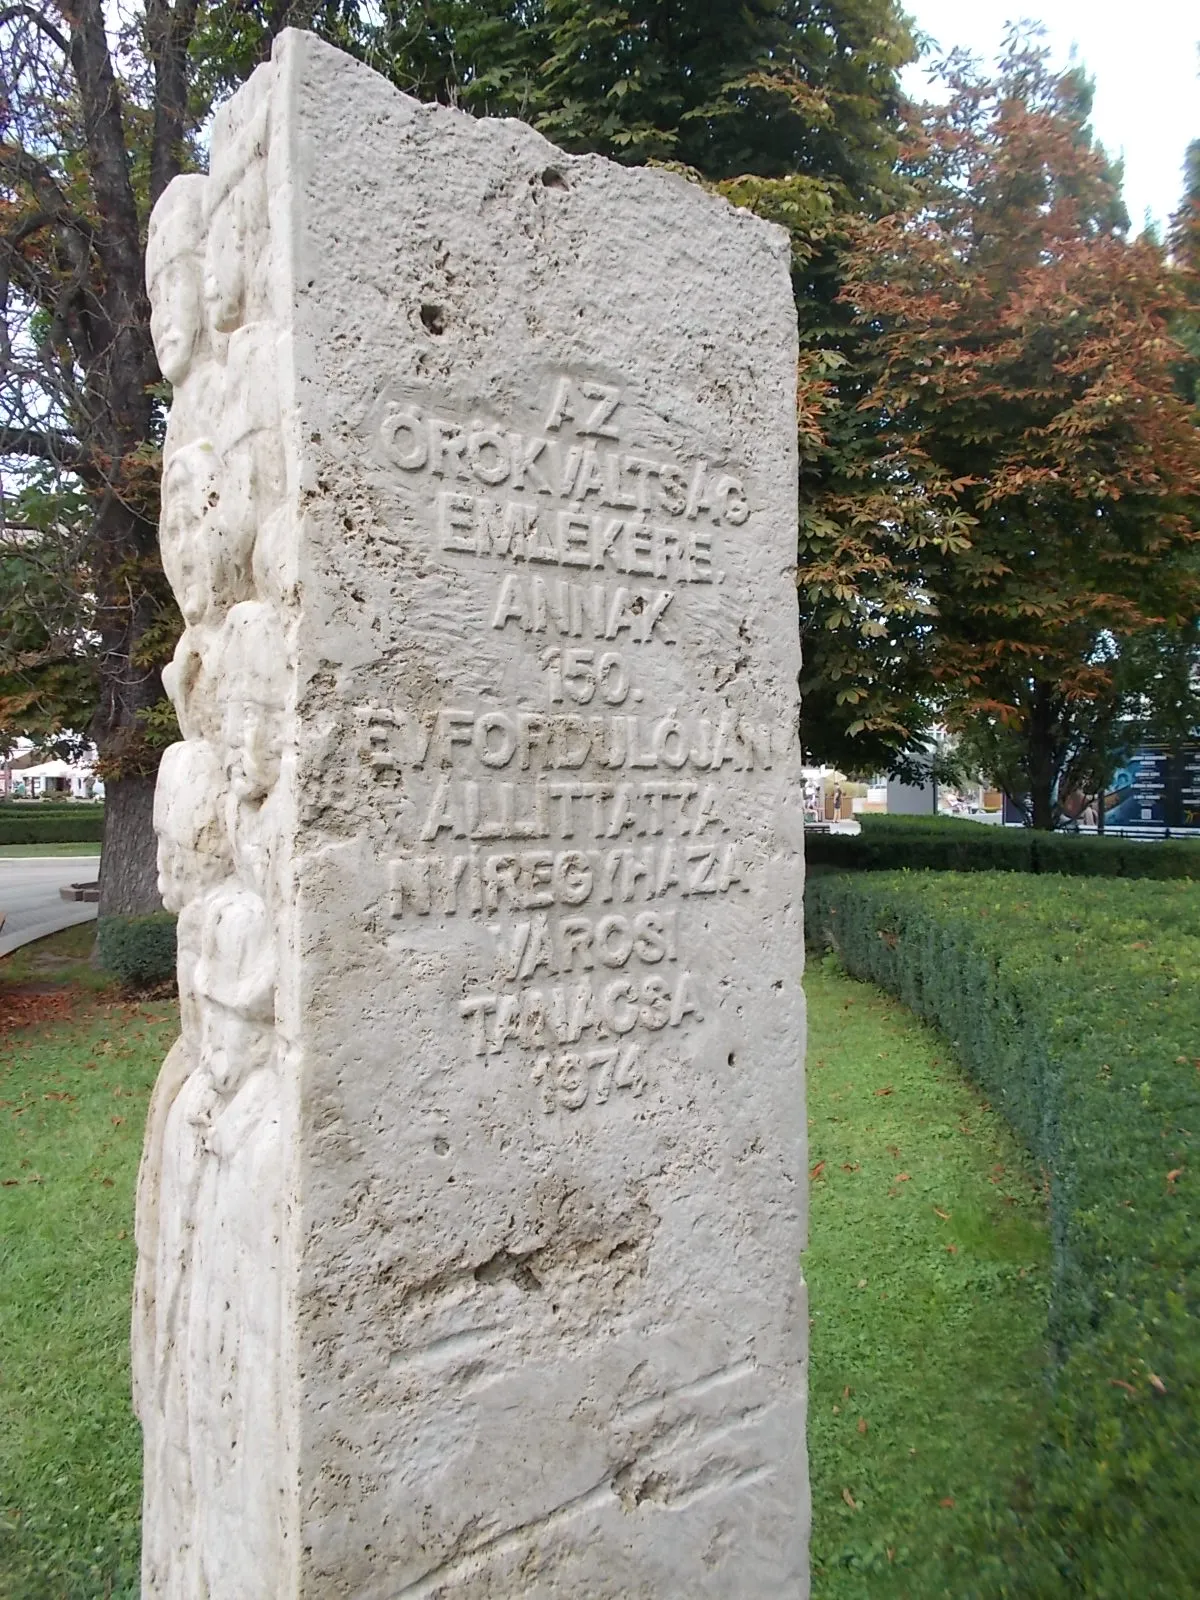 Photo showing: : Memorial column to the liberation of Dessewffy and Károlyi landlords. Because in 1824 the city bought free city status ( 150th anniversary, 1974 limestone works by Sándor Nagy ). Depicts: on the left side of the memorial column are the doubtful (peasants?) faces, on the right  side are trusting (peasants) faces. - Kossuth Square, Nyíregyháza, Szabolcs-Szatmár-Bereg County, Hungary.